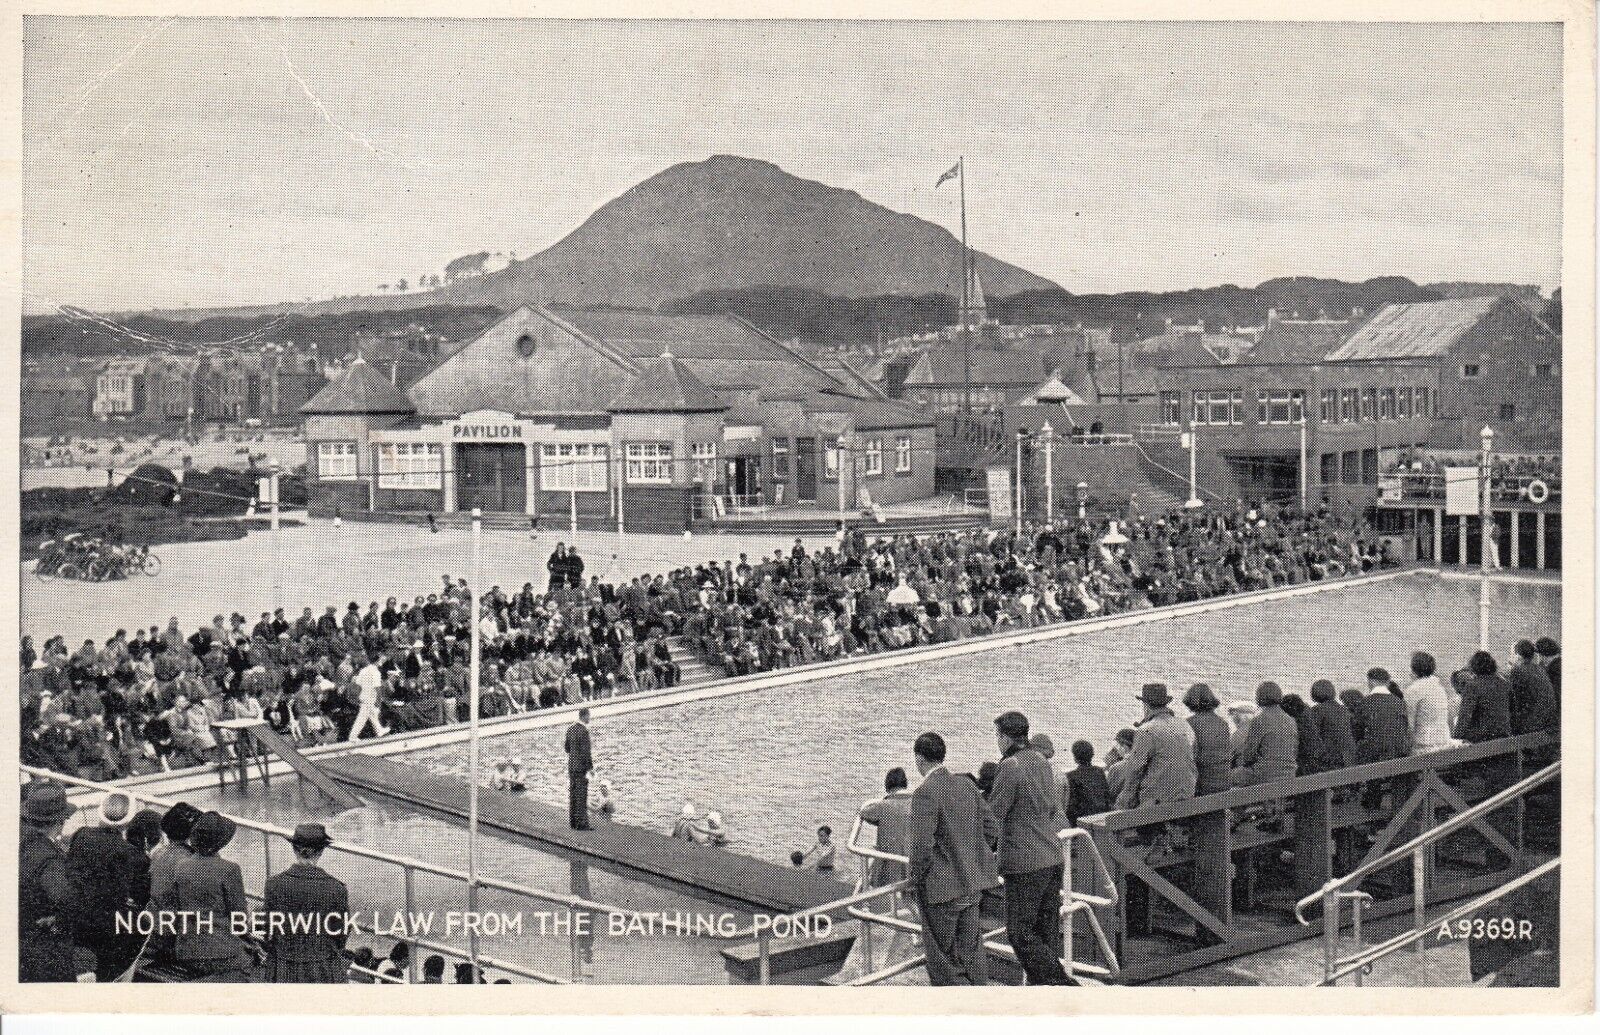 House Clearance - Service "North Berwick Law From The Bathing Pond" (Valentine No. A9369, 1939)